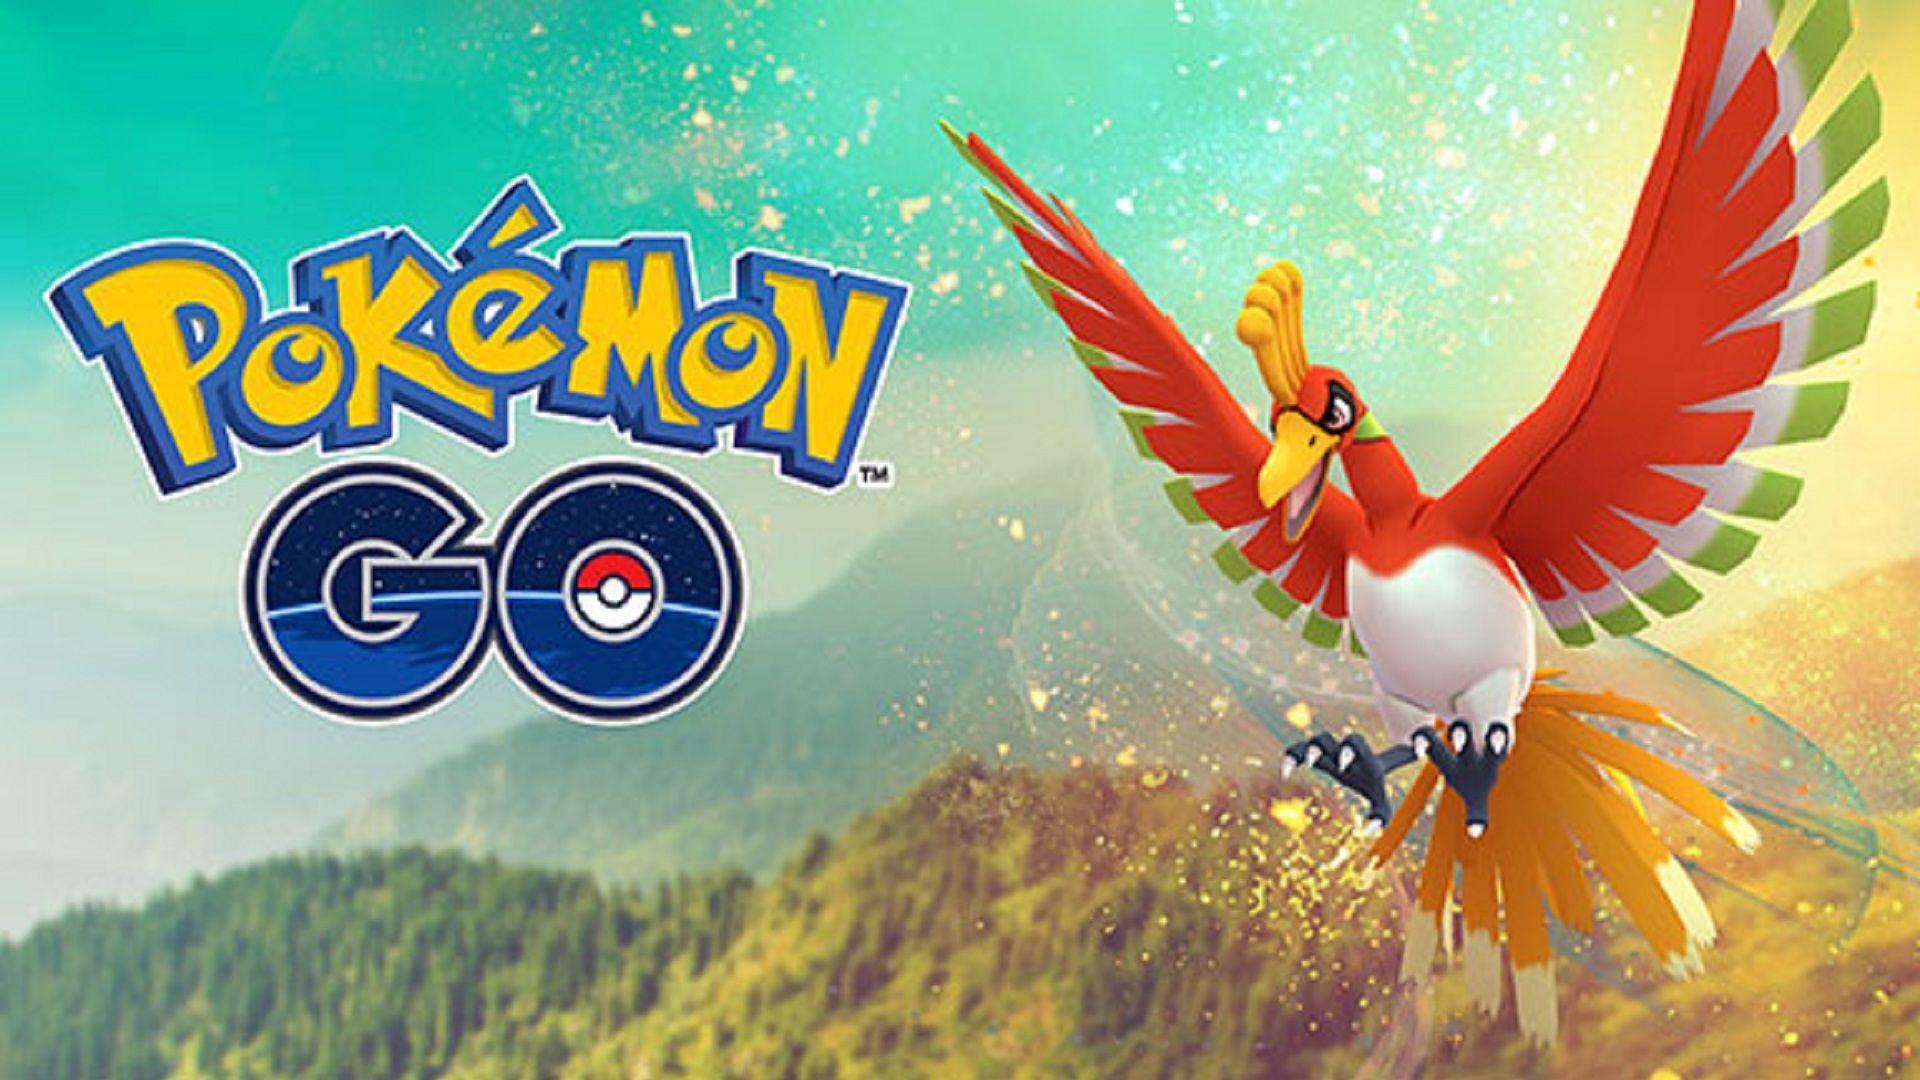 Pokémon Go Ho-oh best movesets, weakness, counters, and raid guide - Polygon